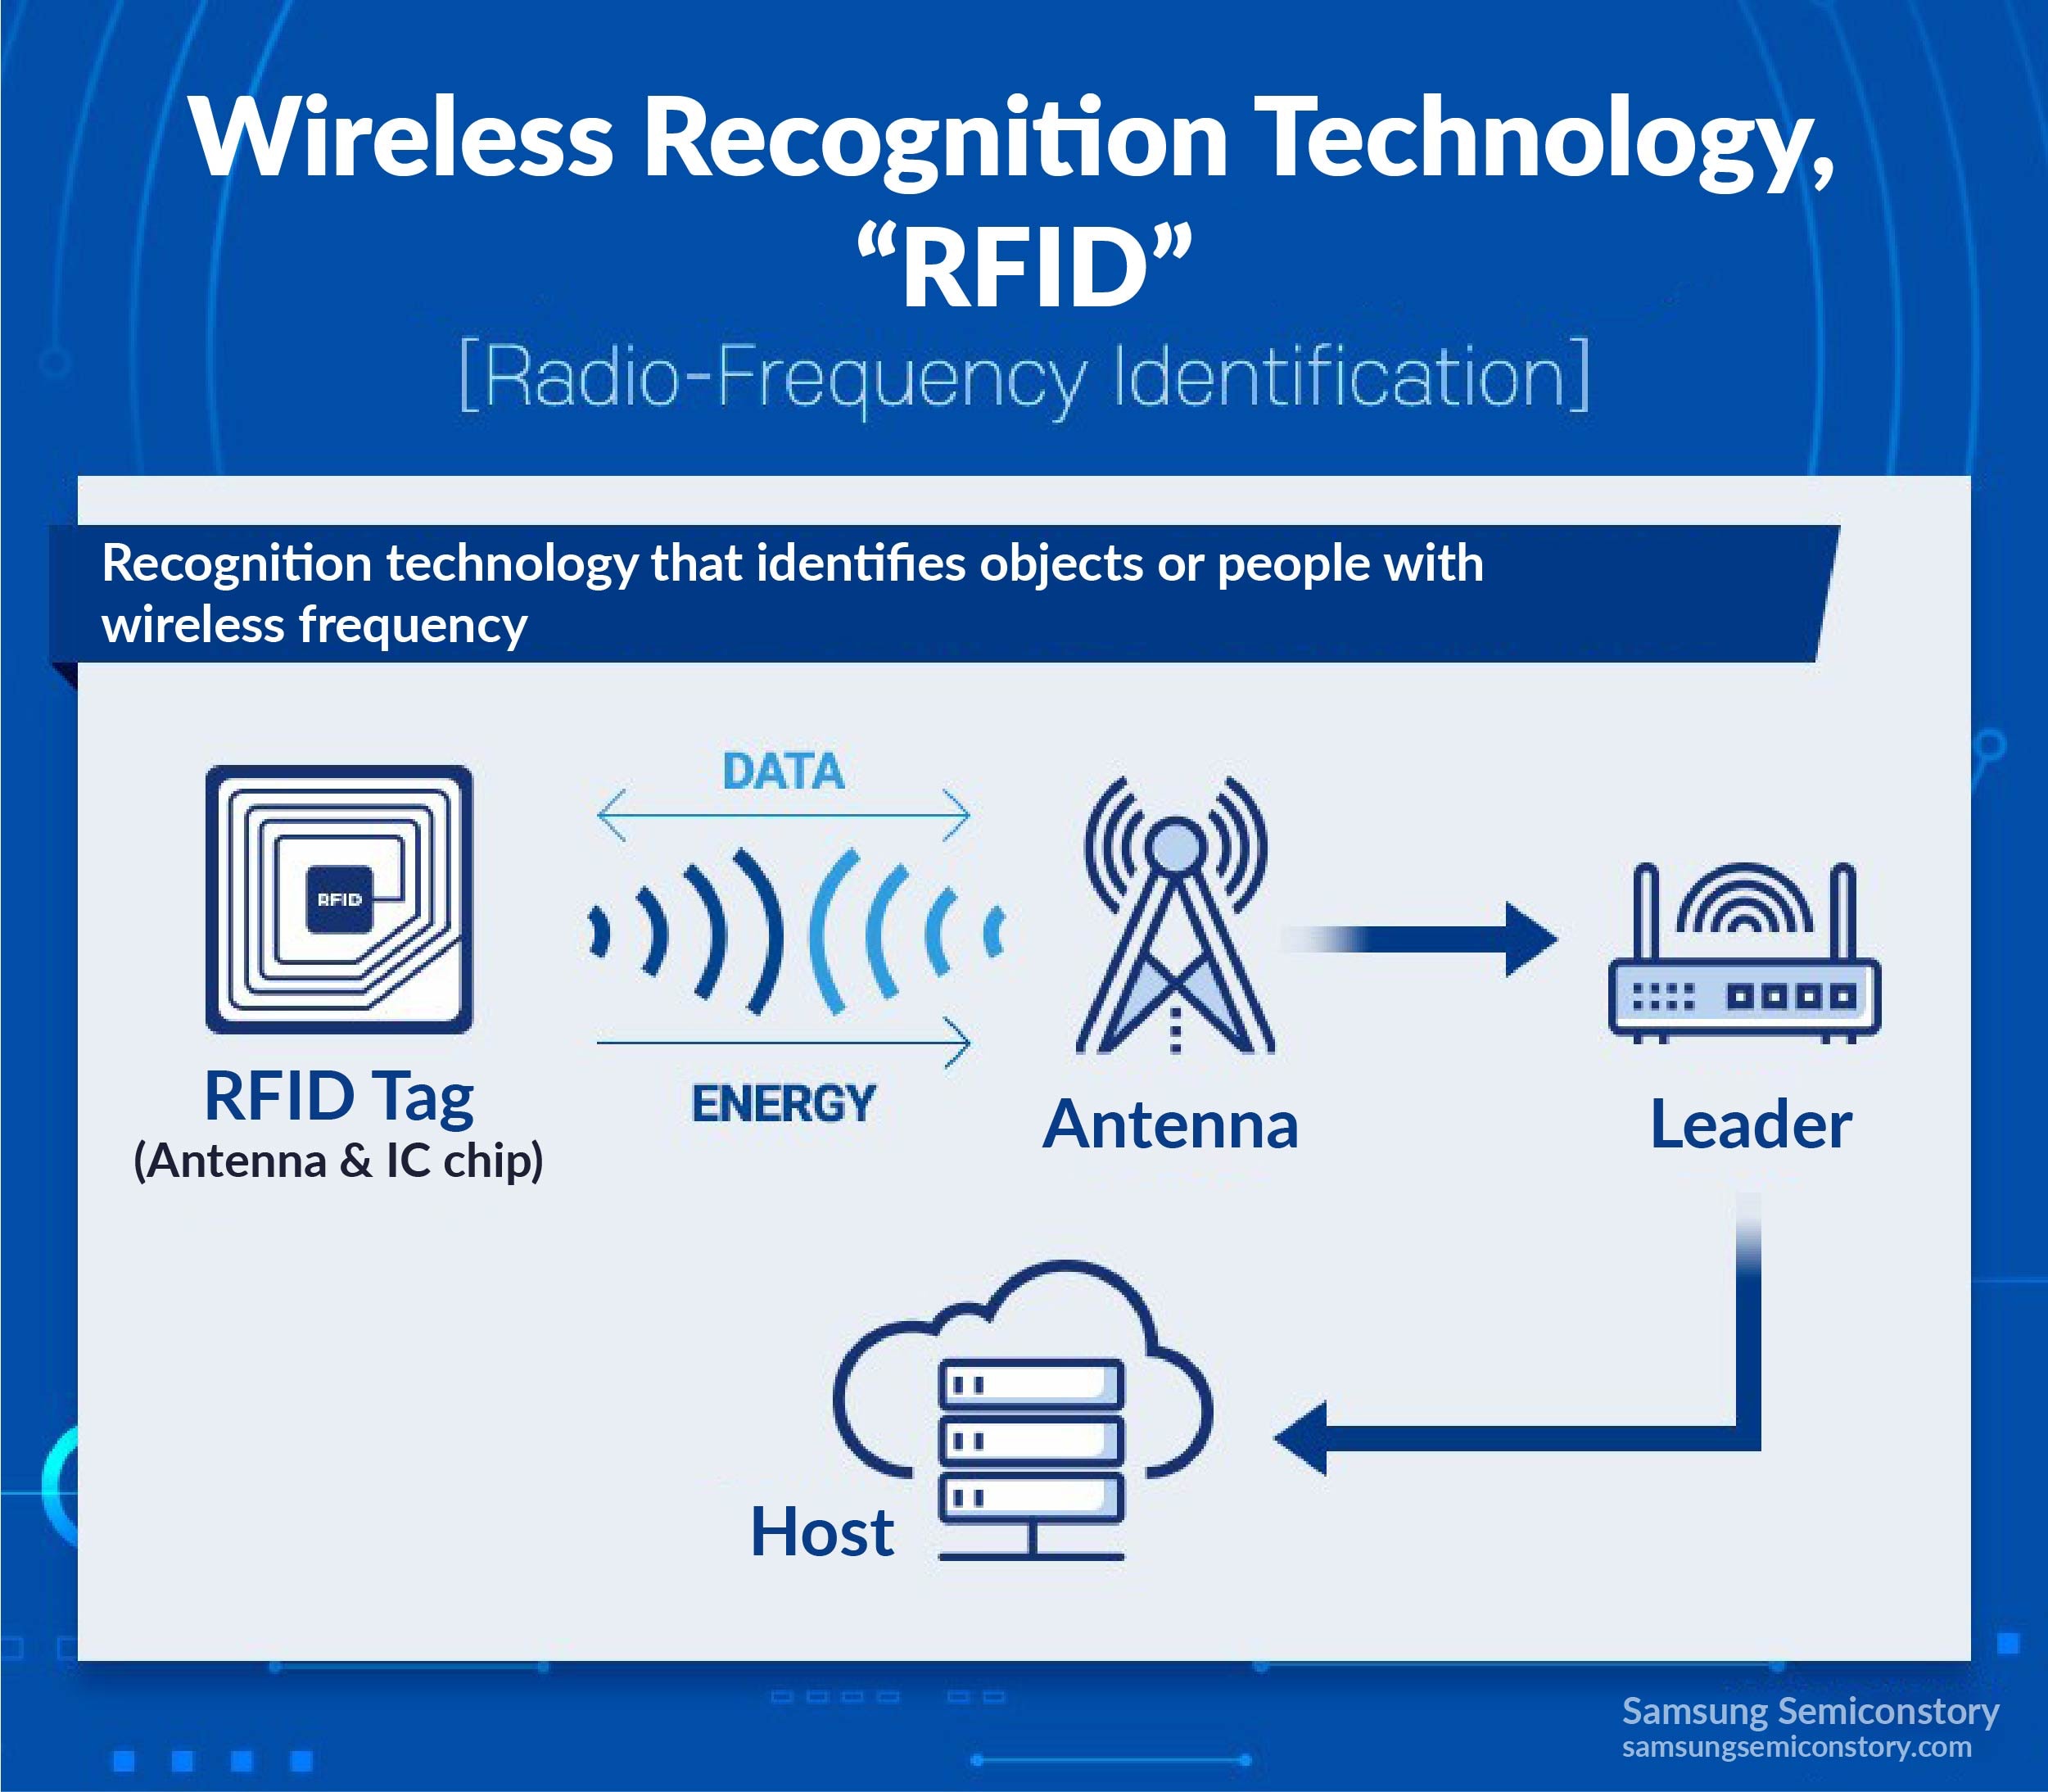 What's new for RFID